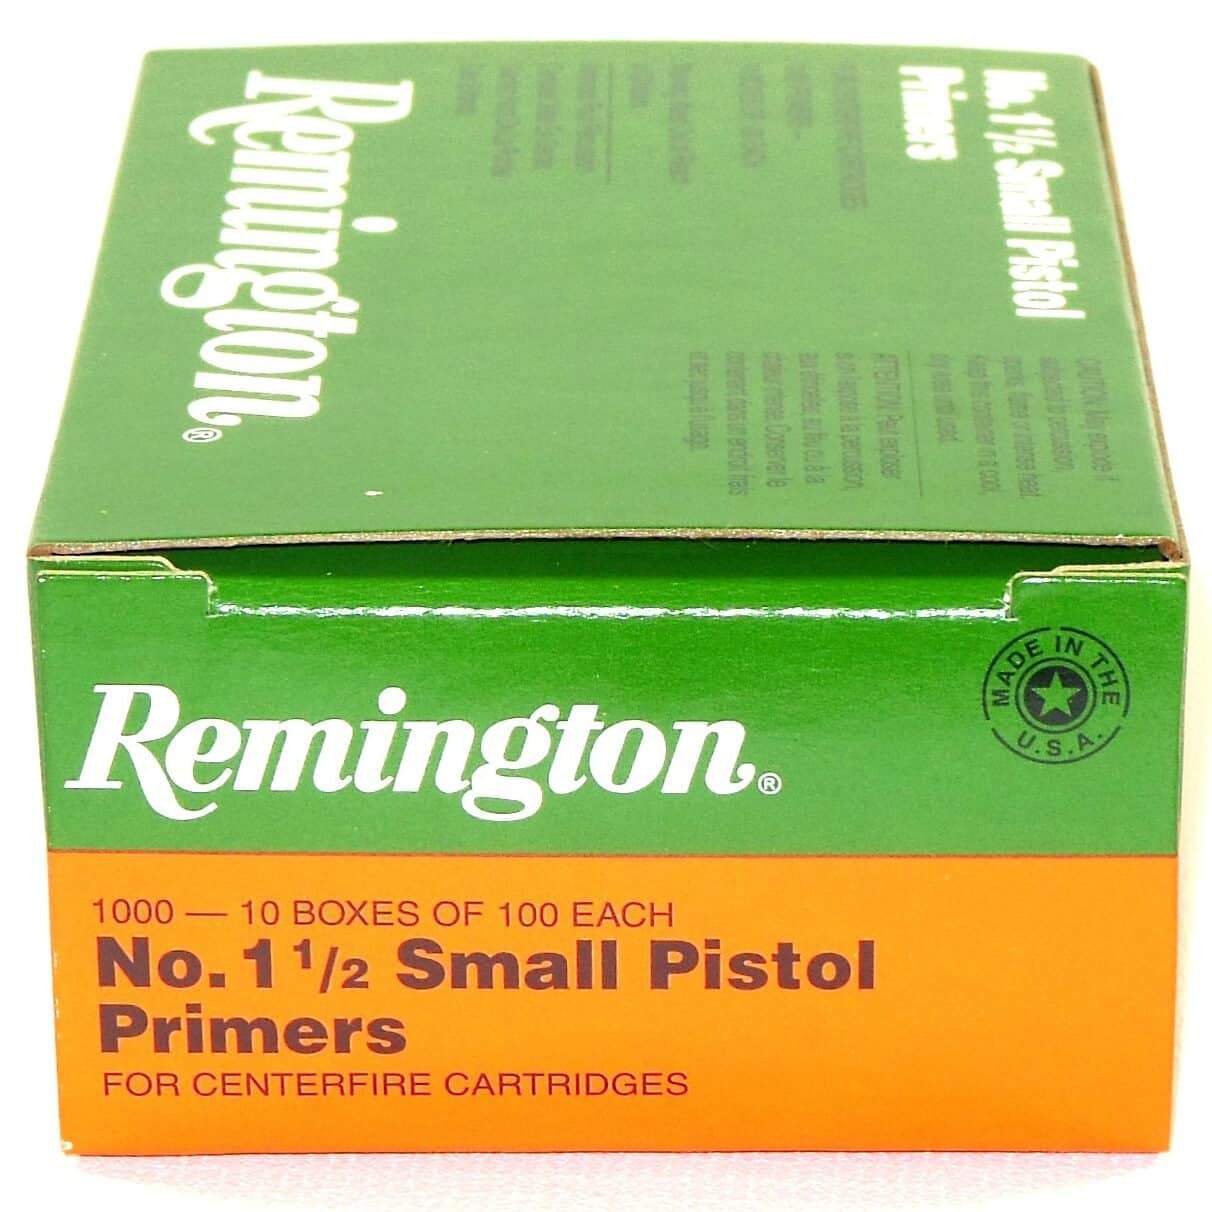 Featured image for “Remington 112 Small Pistol Primers”